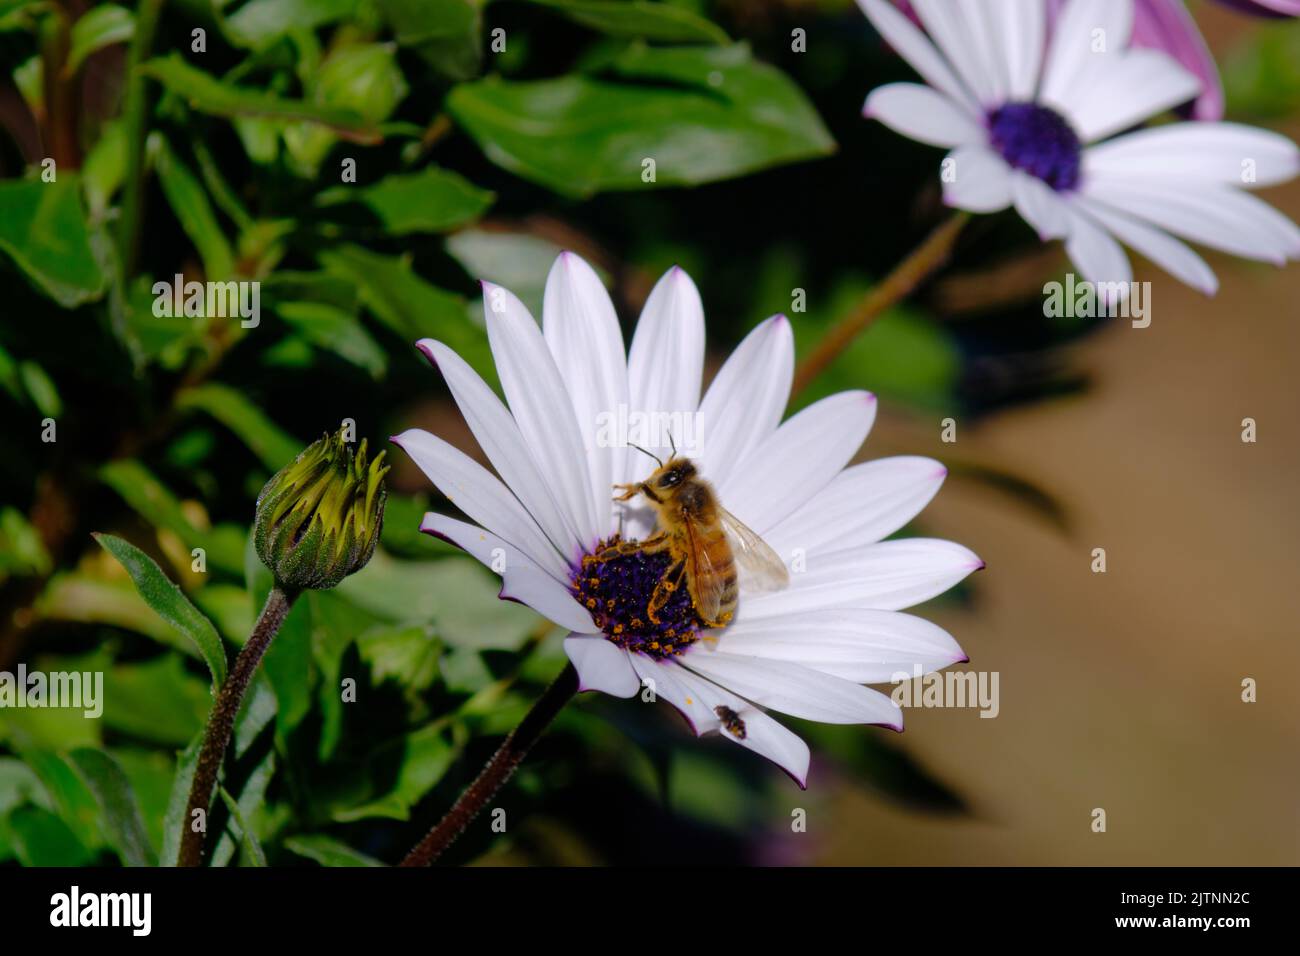 An Australian native singless bee (meliponini) collects pollen from an African daisy. This photo is a single image (not stacked or manipulated) and us Stock Photo